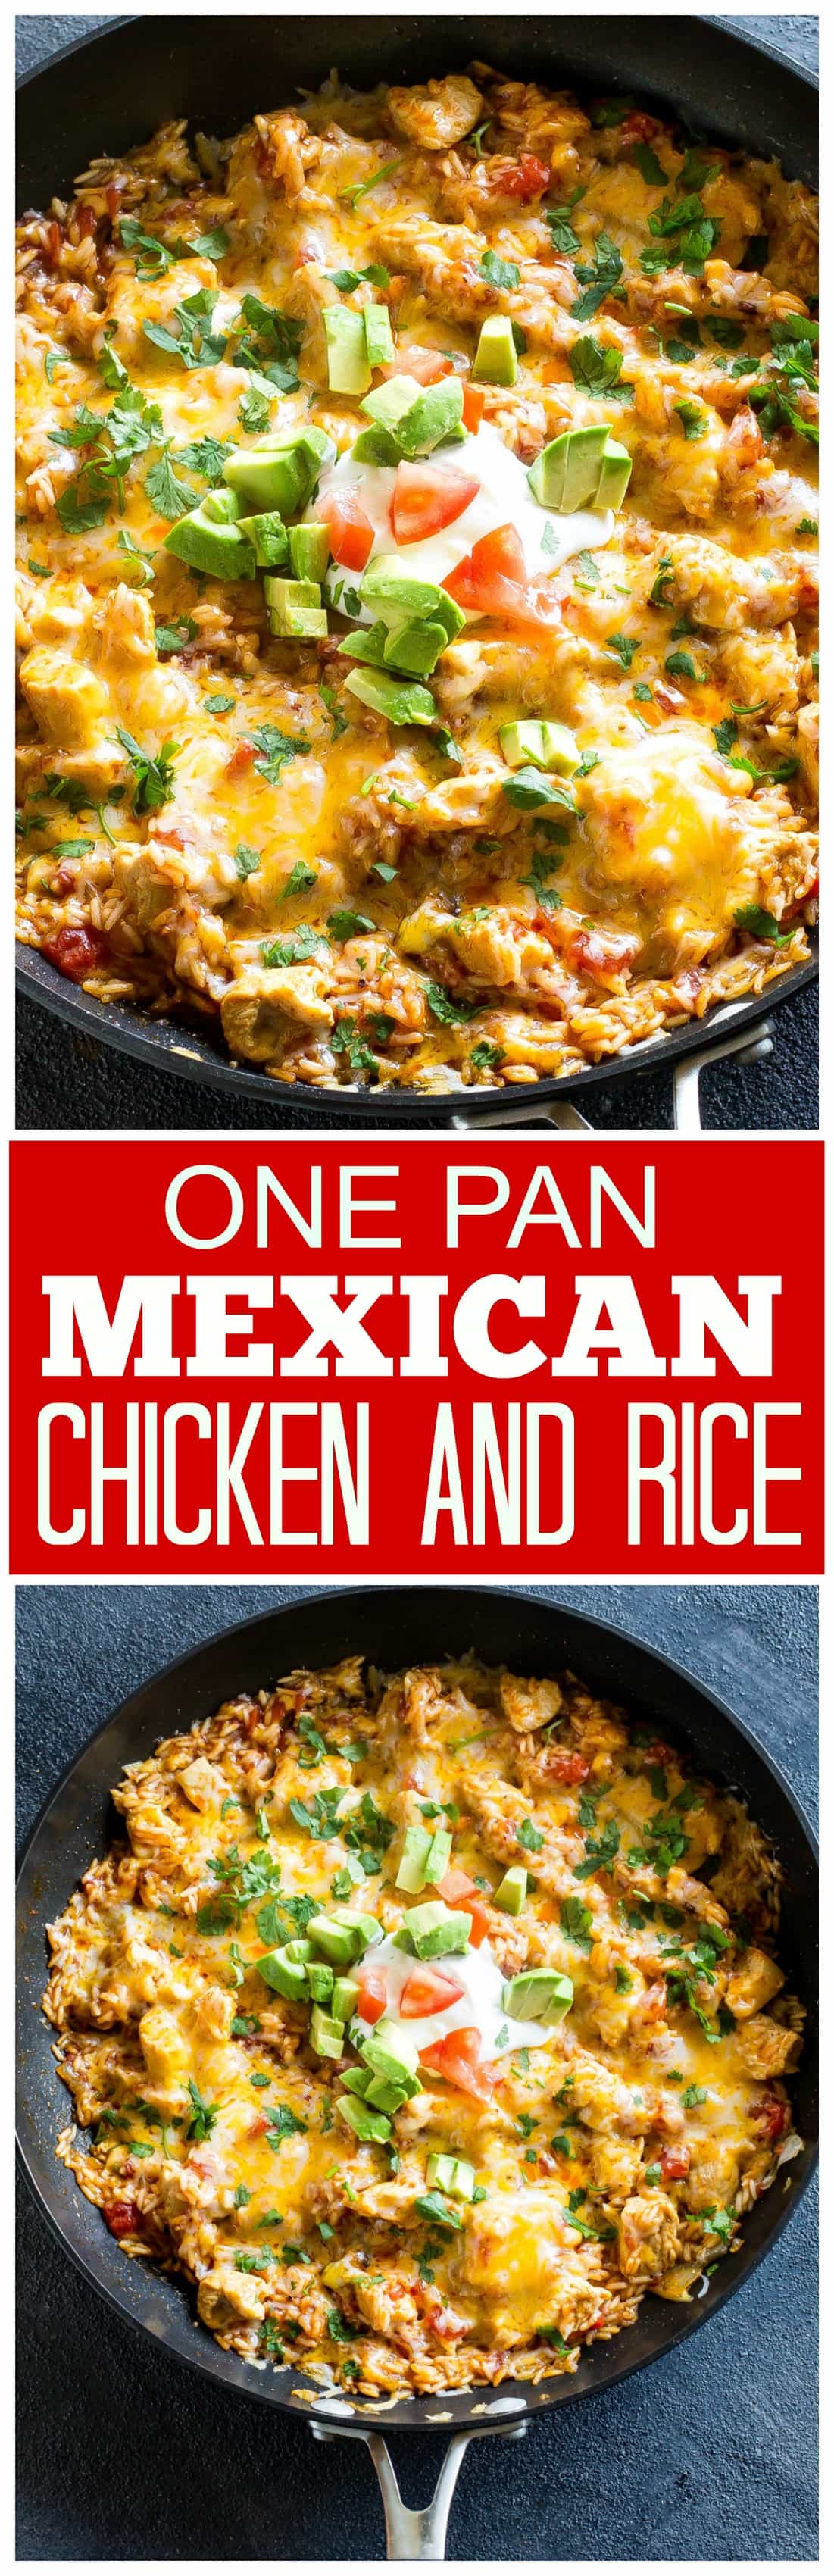 One Pan Mexican Chicken and Rice - an easy dinner ready in under 30 minutes! #mexican #chicken #dinner #onepan #easy #rice #skillet